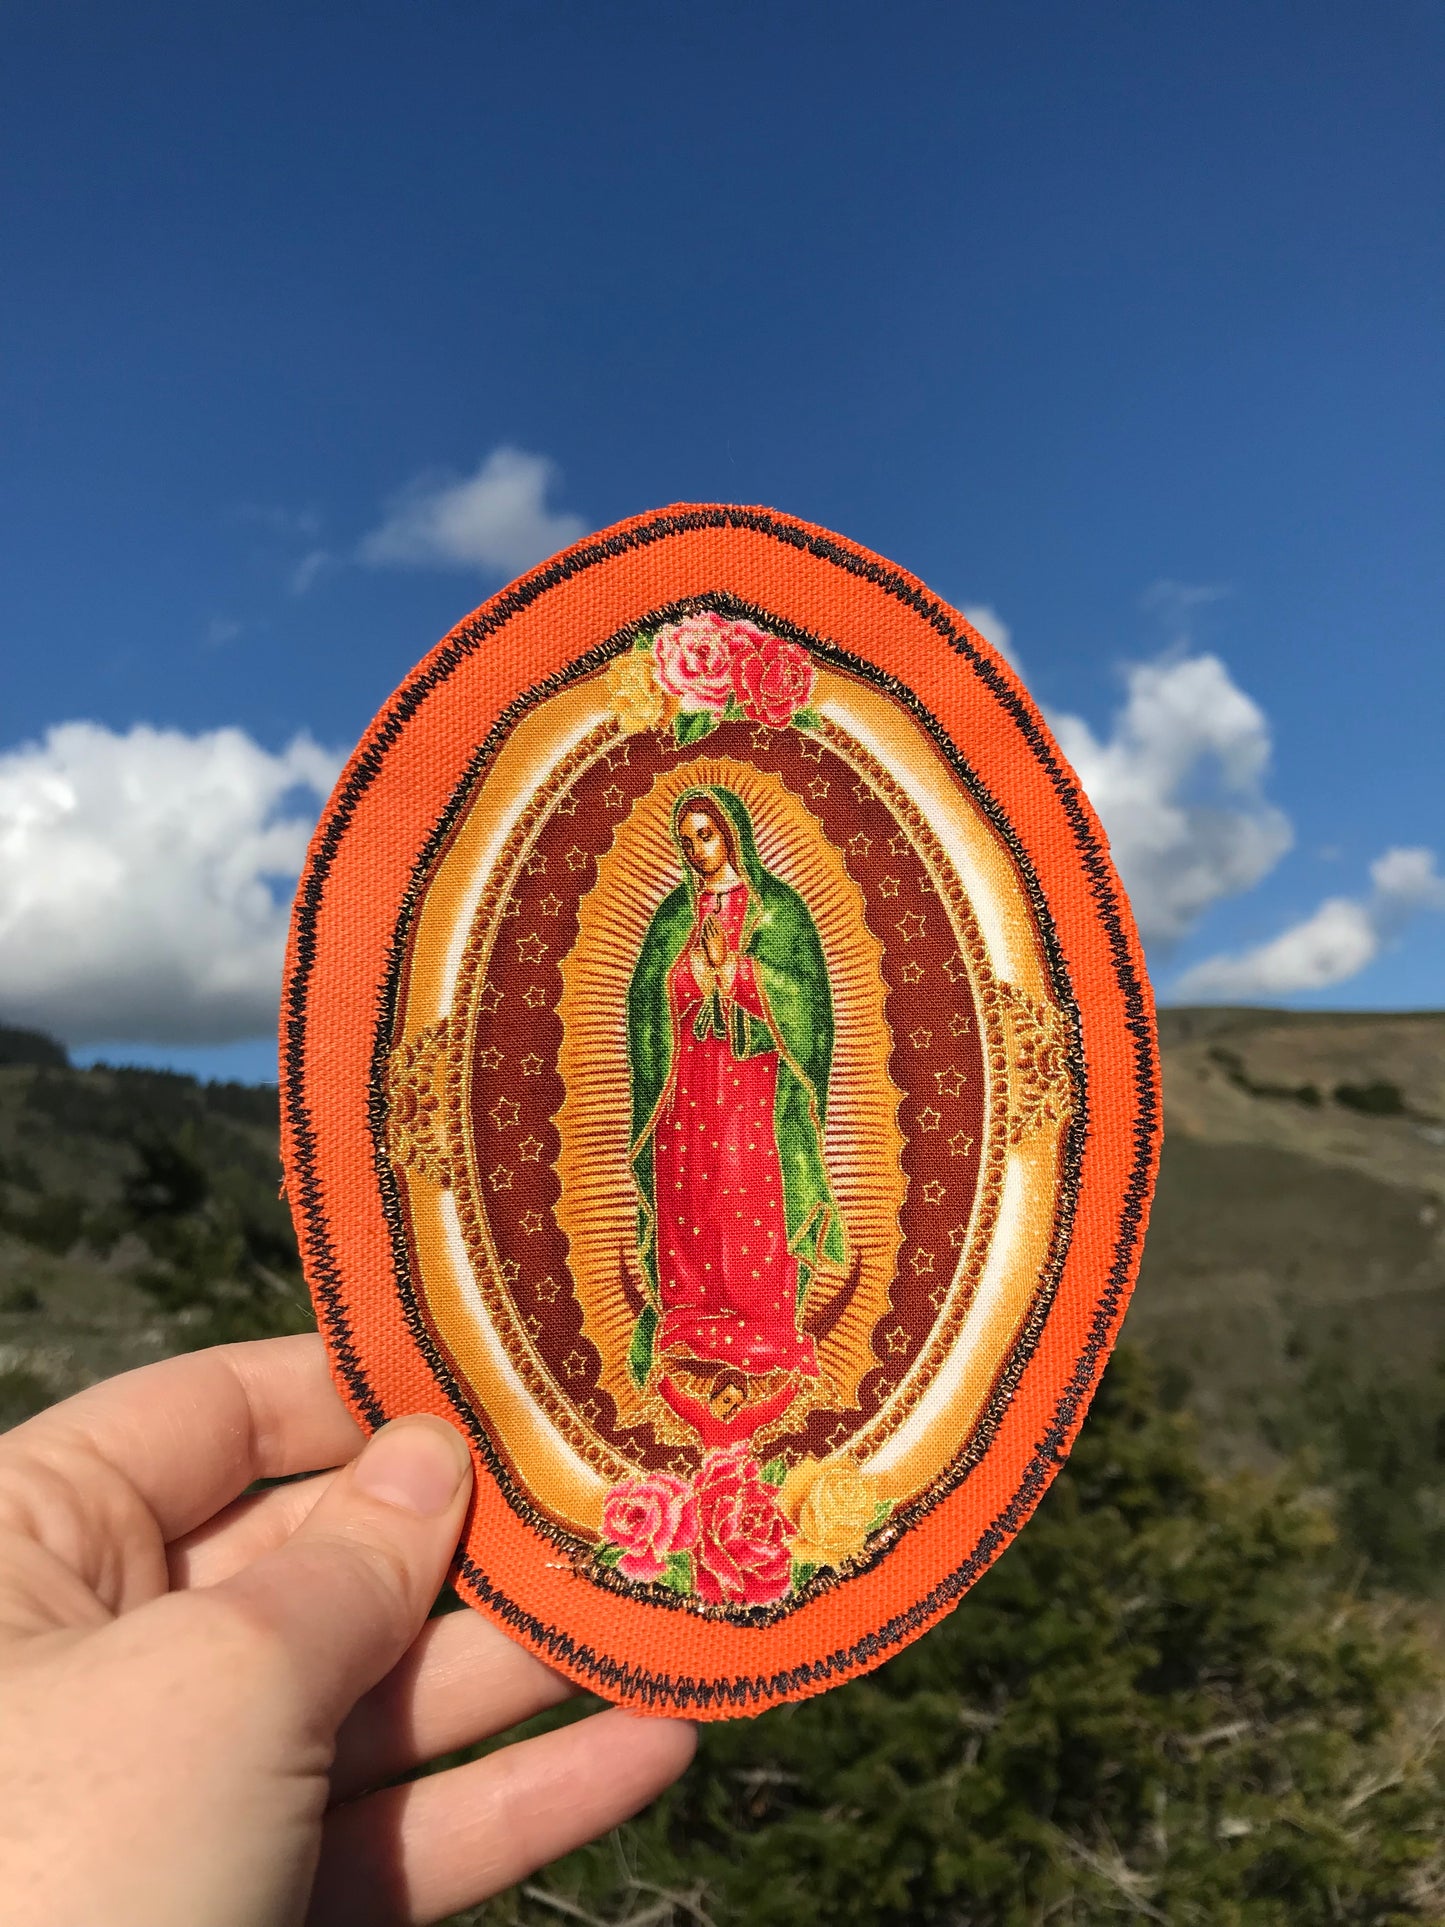 Our Lady of Guadalupe. Handmade Appliqué Canvas Patch